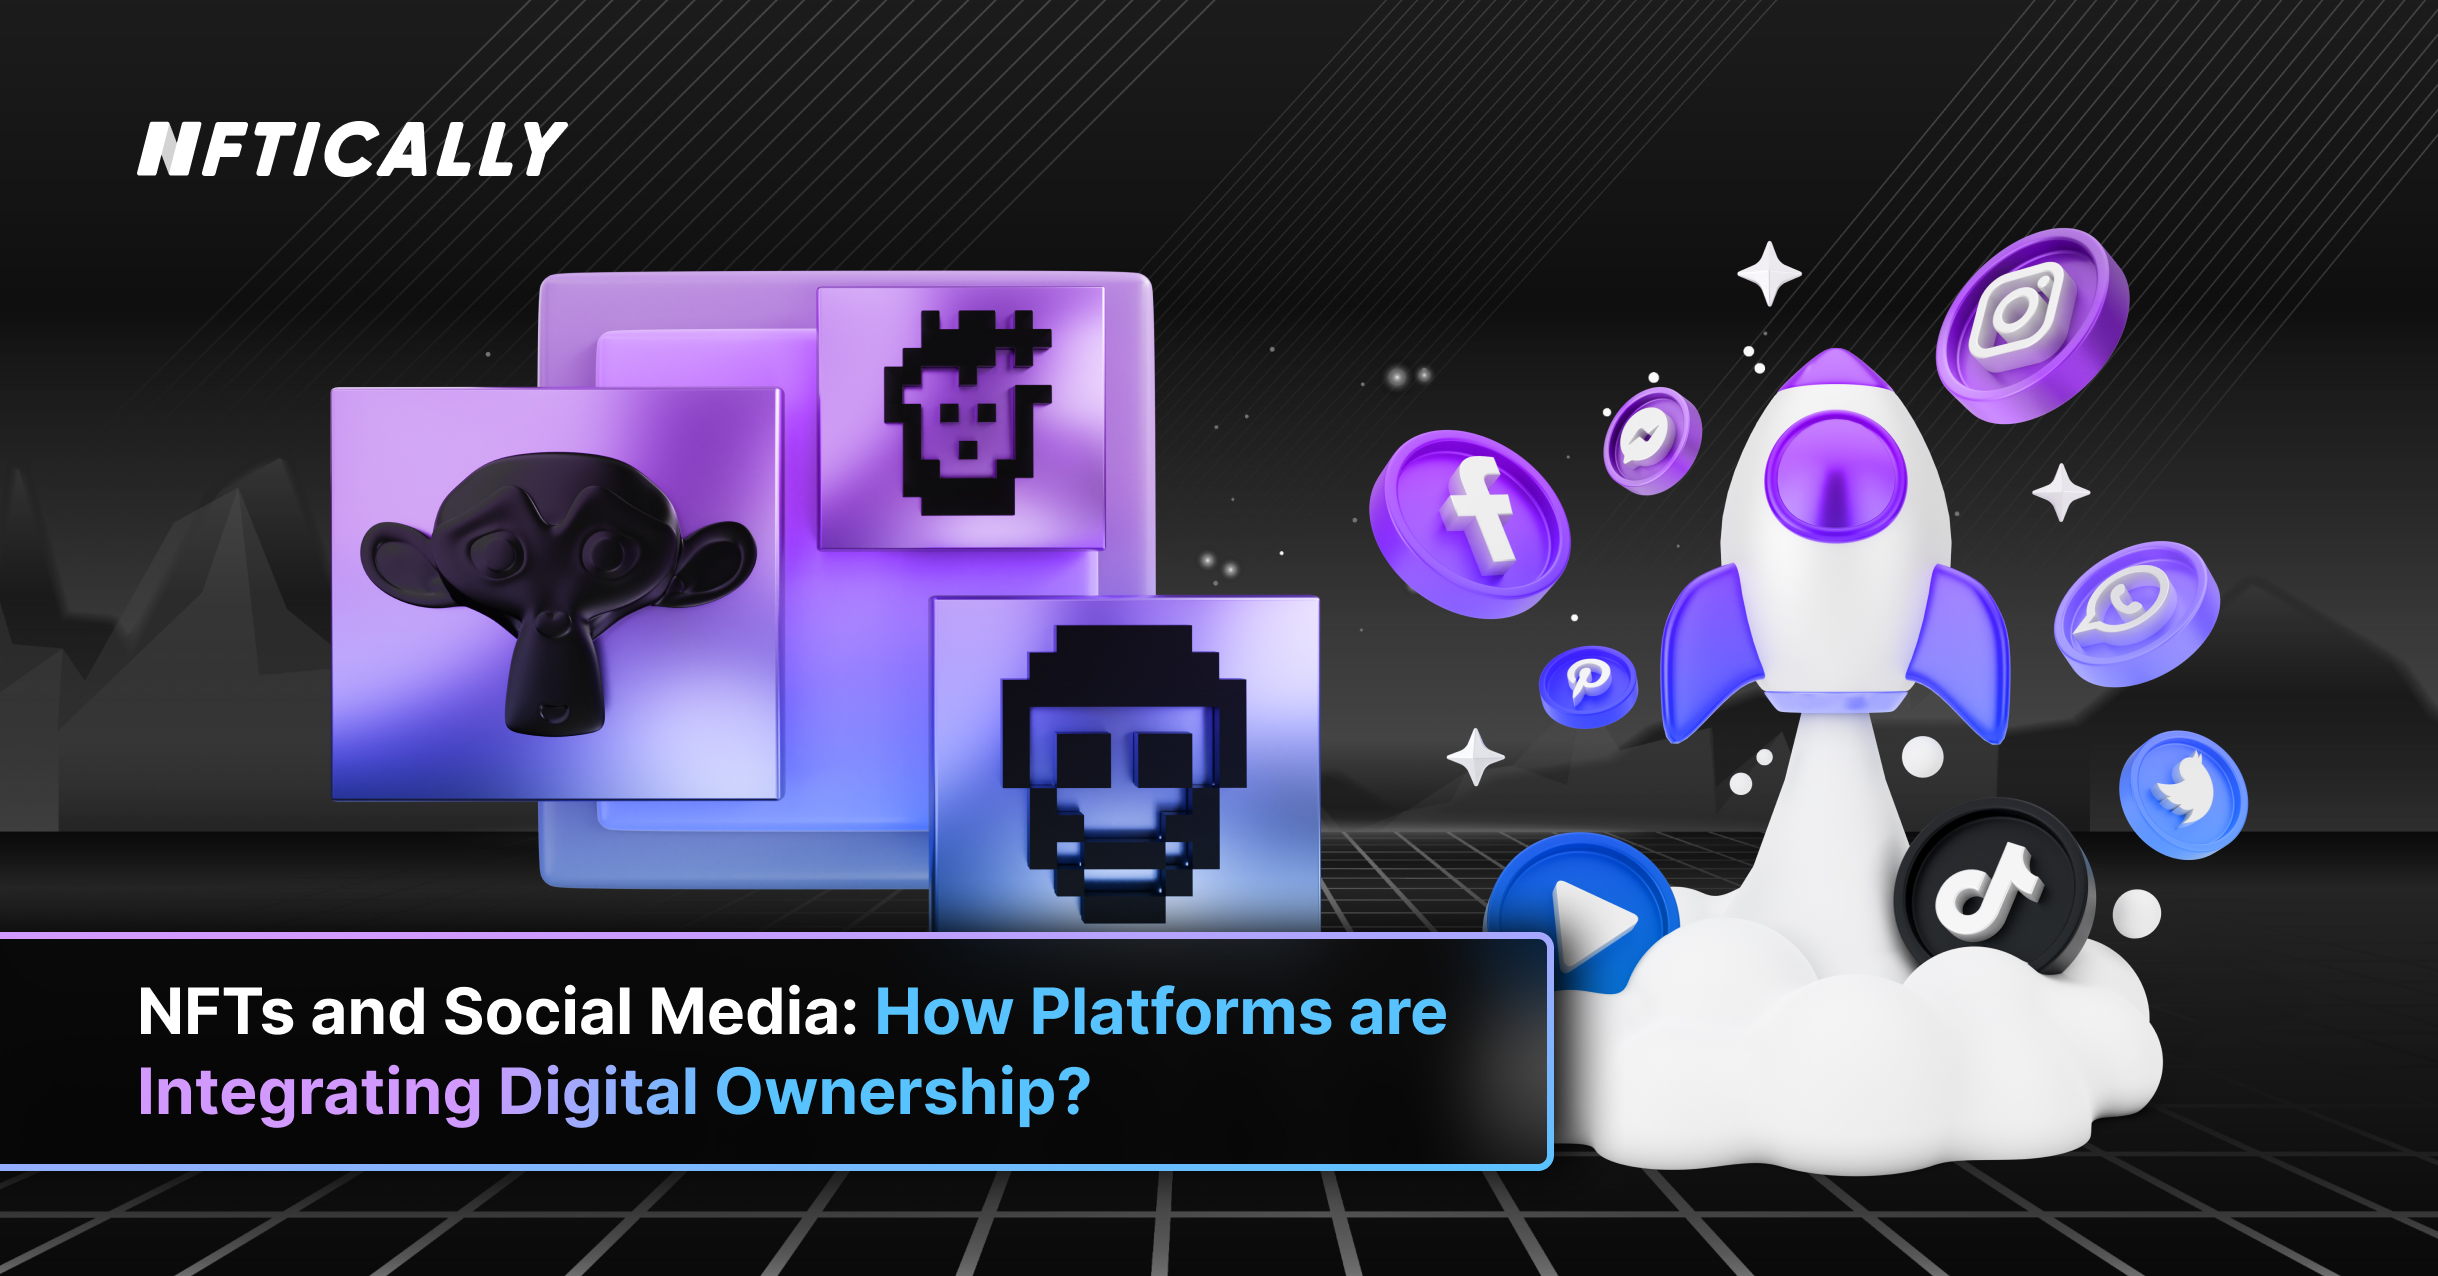 NFTs and Social Media: How Platforms are Integrating Digital Ownership